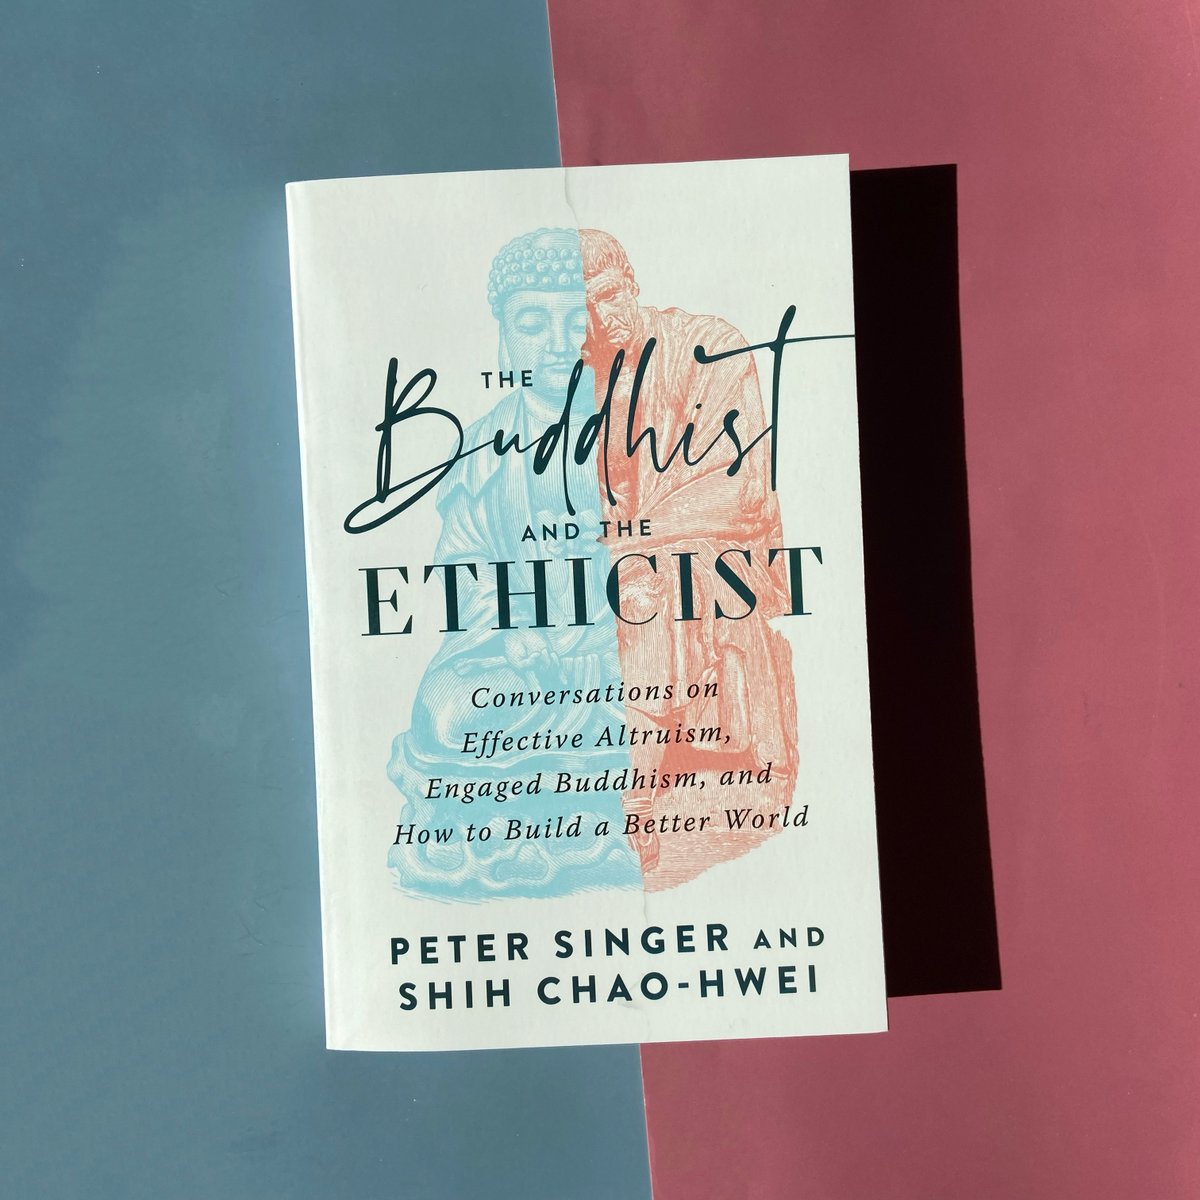 I had the opportunity to explore the intersections between Buddhist philosophy and ethical reasoning on PhilosophyPodcasts.org. We talk about how ancient Buddhist teachings can illuminate and challenge our modern ethical dilemmas, offering insights into creating a more ethical